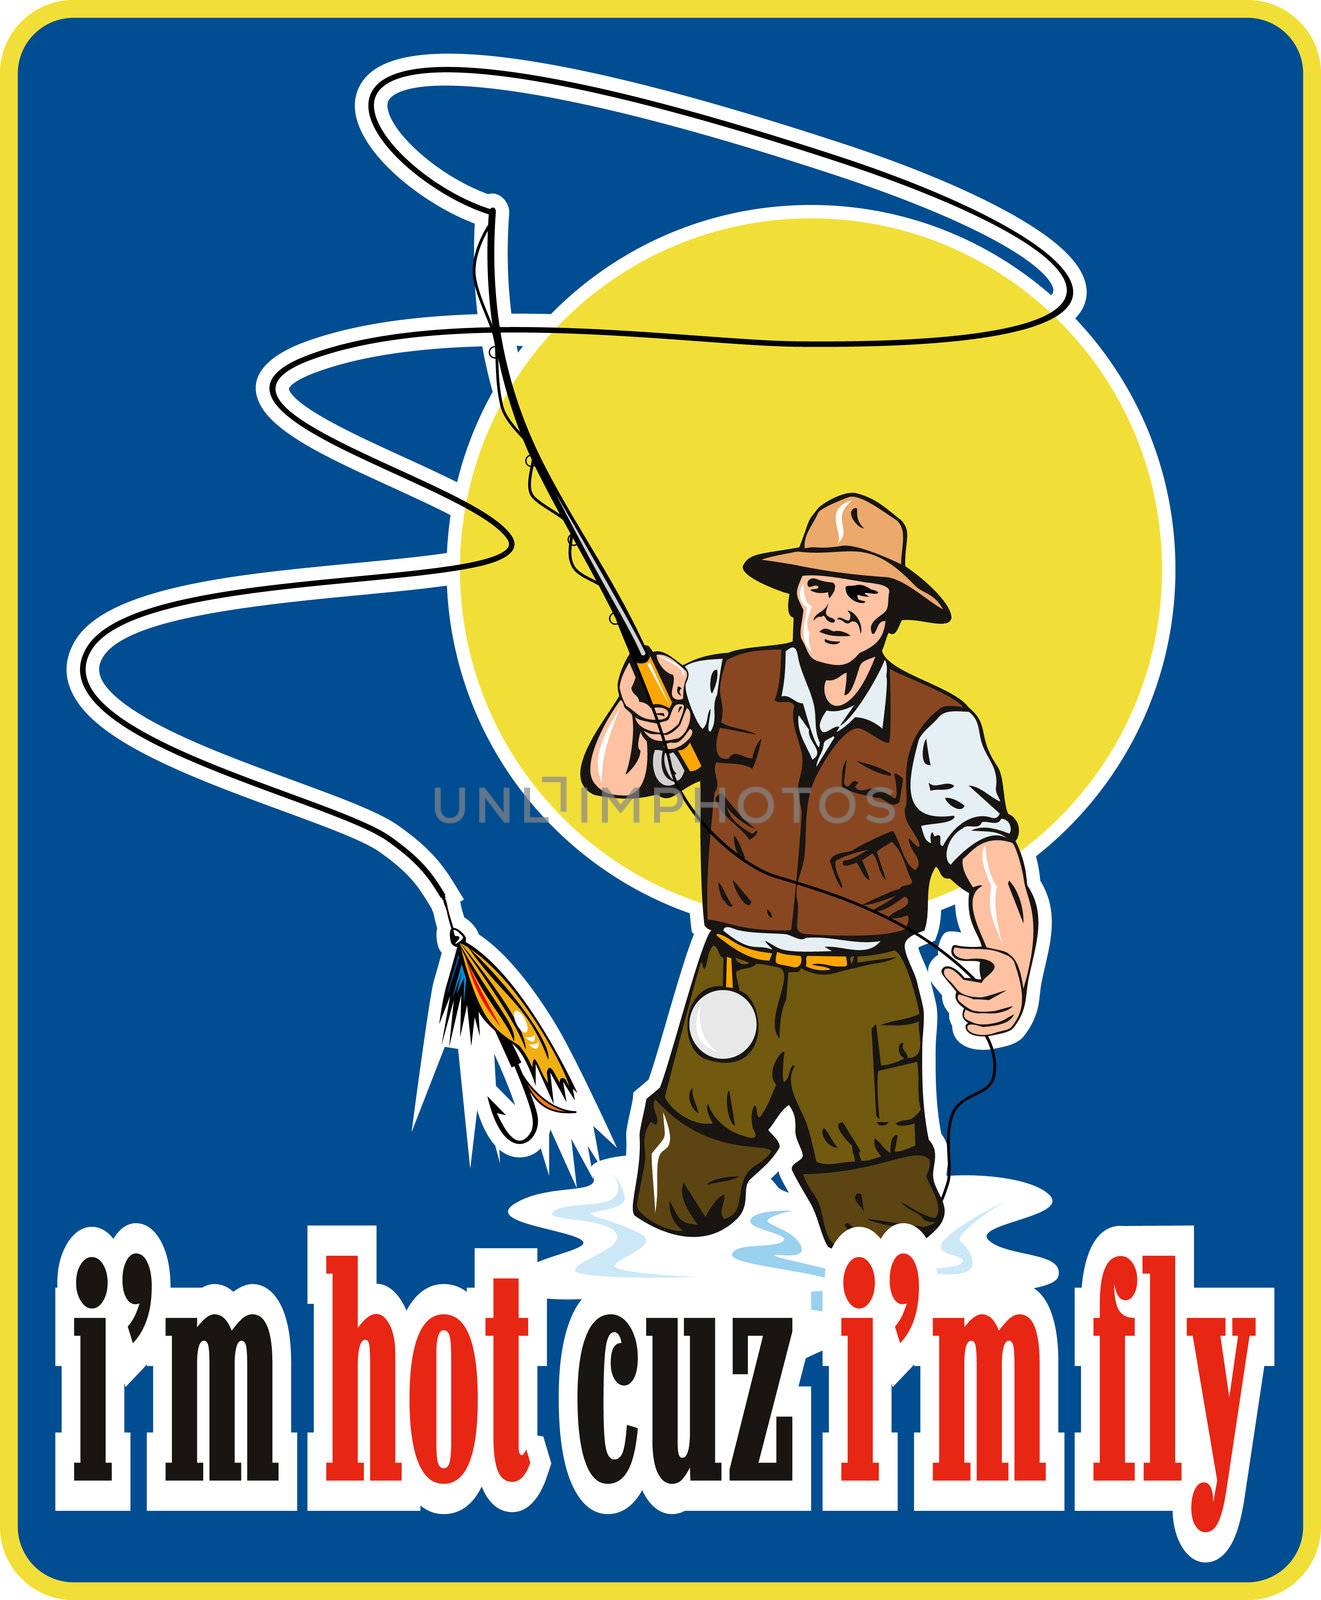 illustration of a fly fisherman fishing with fly rod and reel and bait lure with words "i'm hot cuz i'm fly" done in retro style